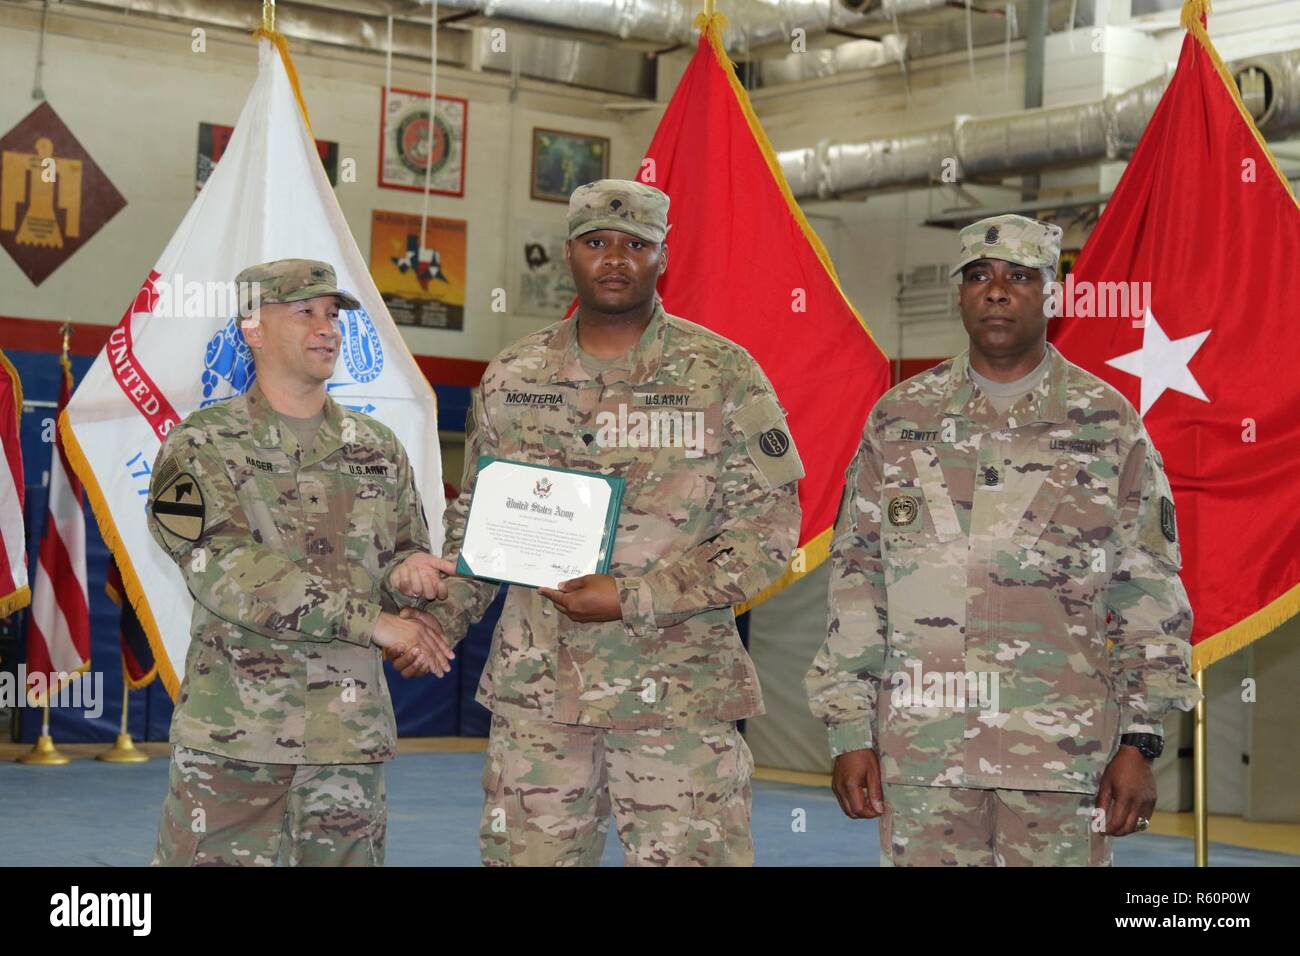 U.S. Army Brig. Gen. Stephen Hager (left), commander, 335th Signal Command, congratulates Army Spc. Deonte Monteria (center), automated logistical specialist, 978th Quartermaster Company, on continuing his commitment to the U.S. Army Reserves, April 22, at Camp Arifjan, Kuwait. The Army Reserve Engagement Cell hosted this annual event, as part of a celebratory day geared toward honoring the men and women who serve in the U.S. Army Reserves. Stock Photo